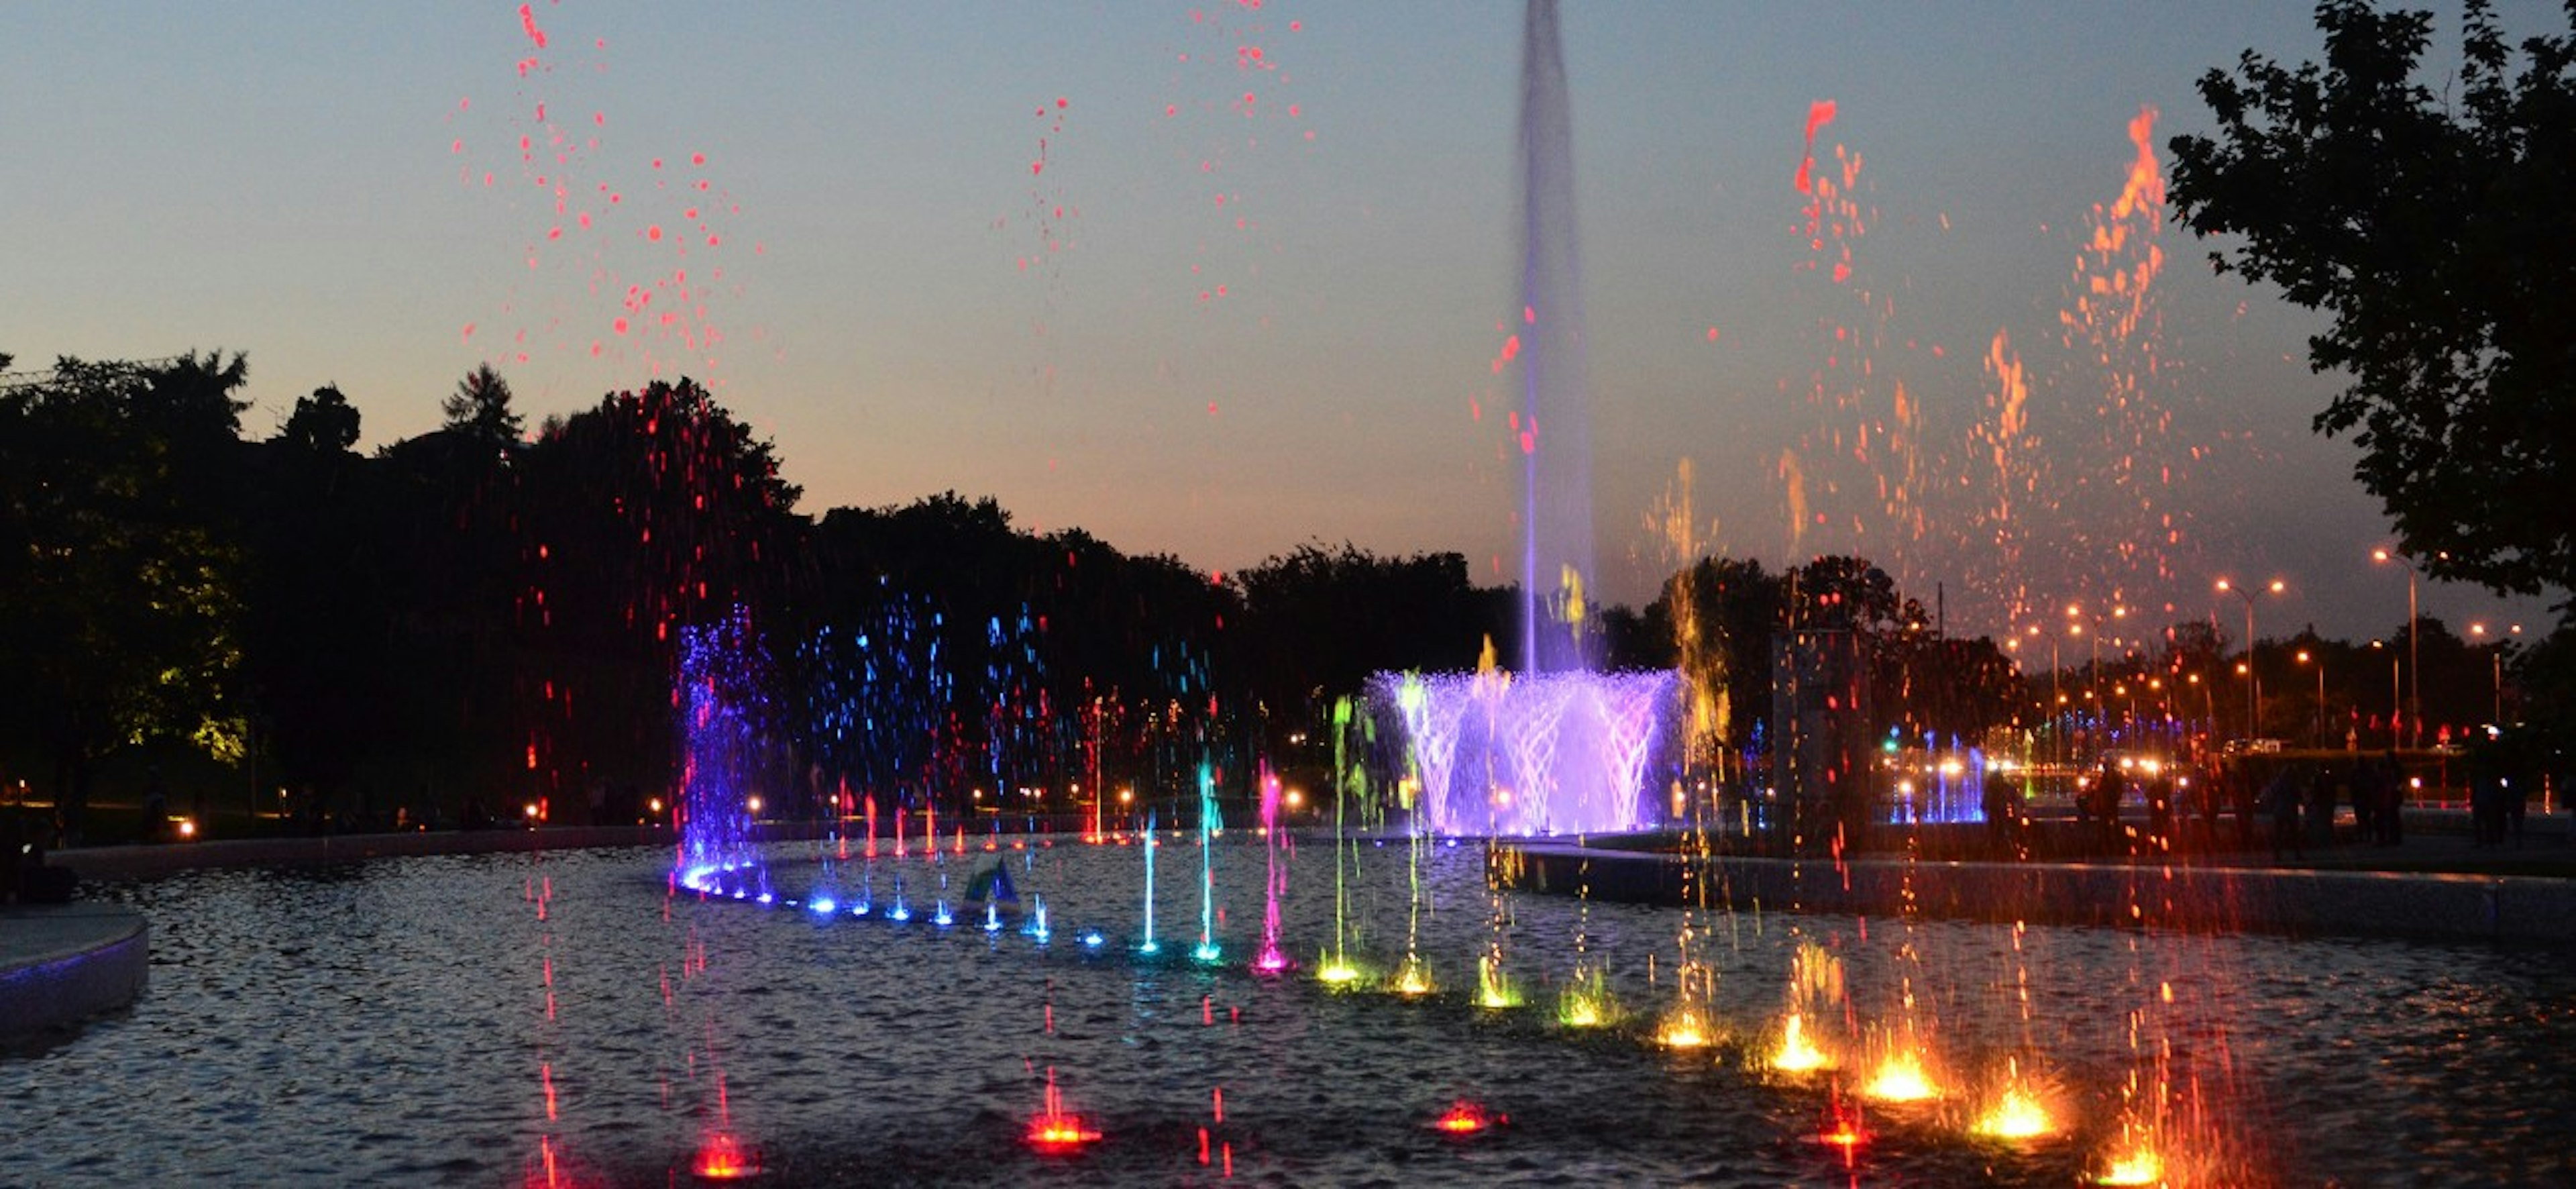 Beautiful view of Multimedia fountain park during twilight, Warsaw, Poland